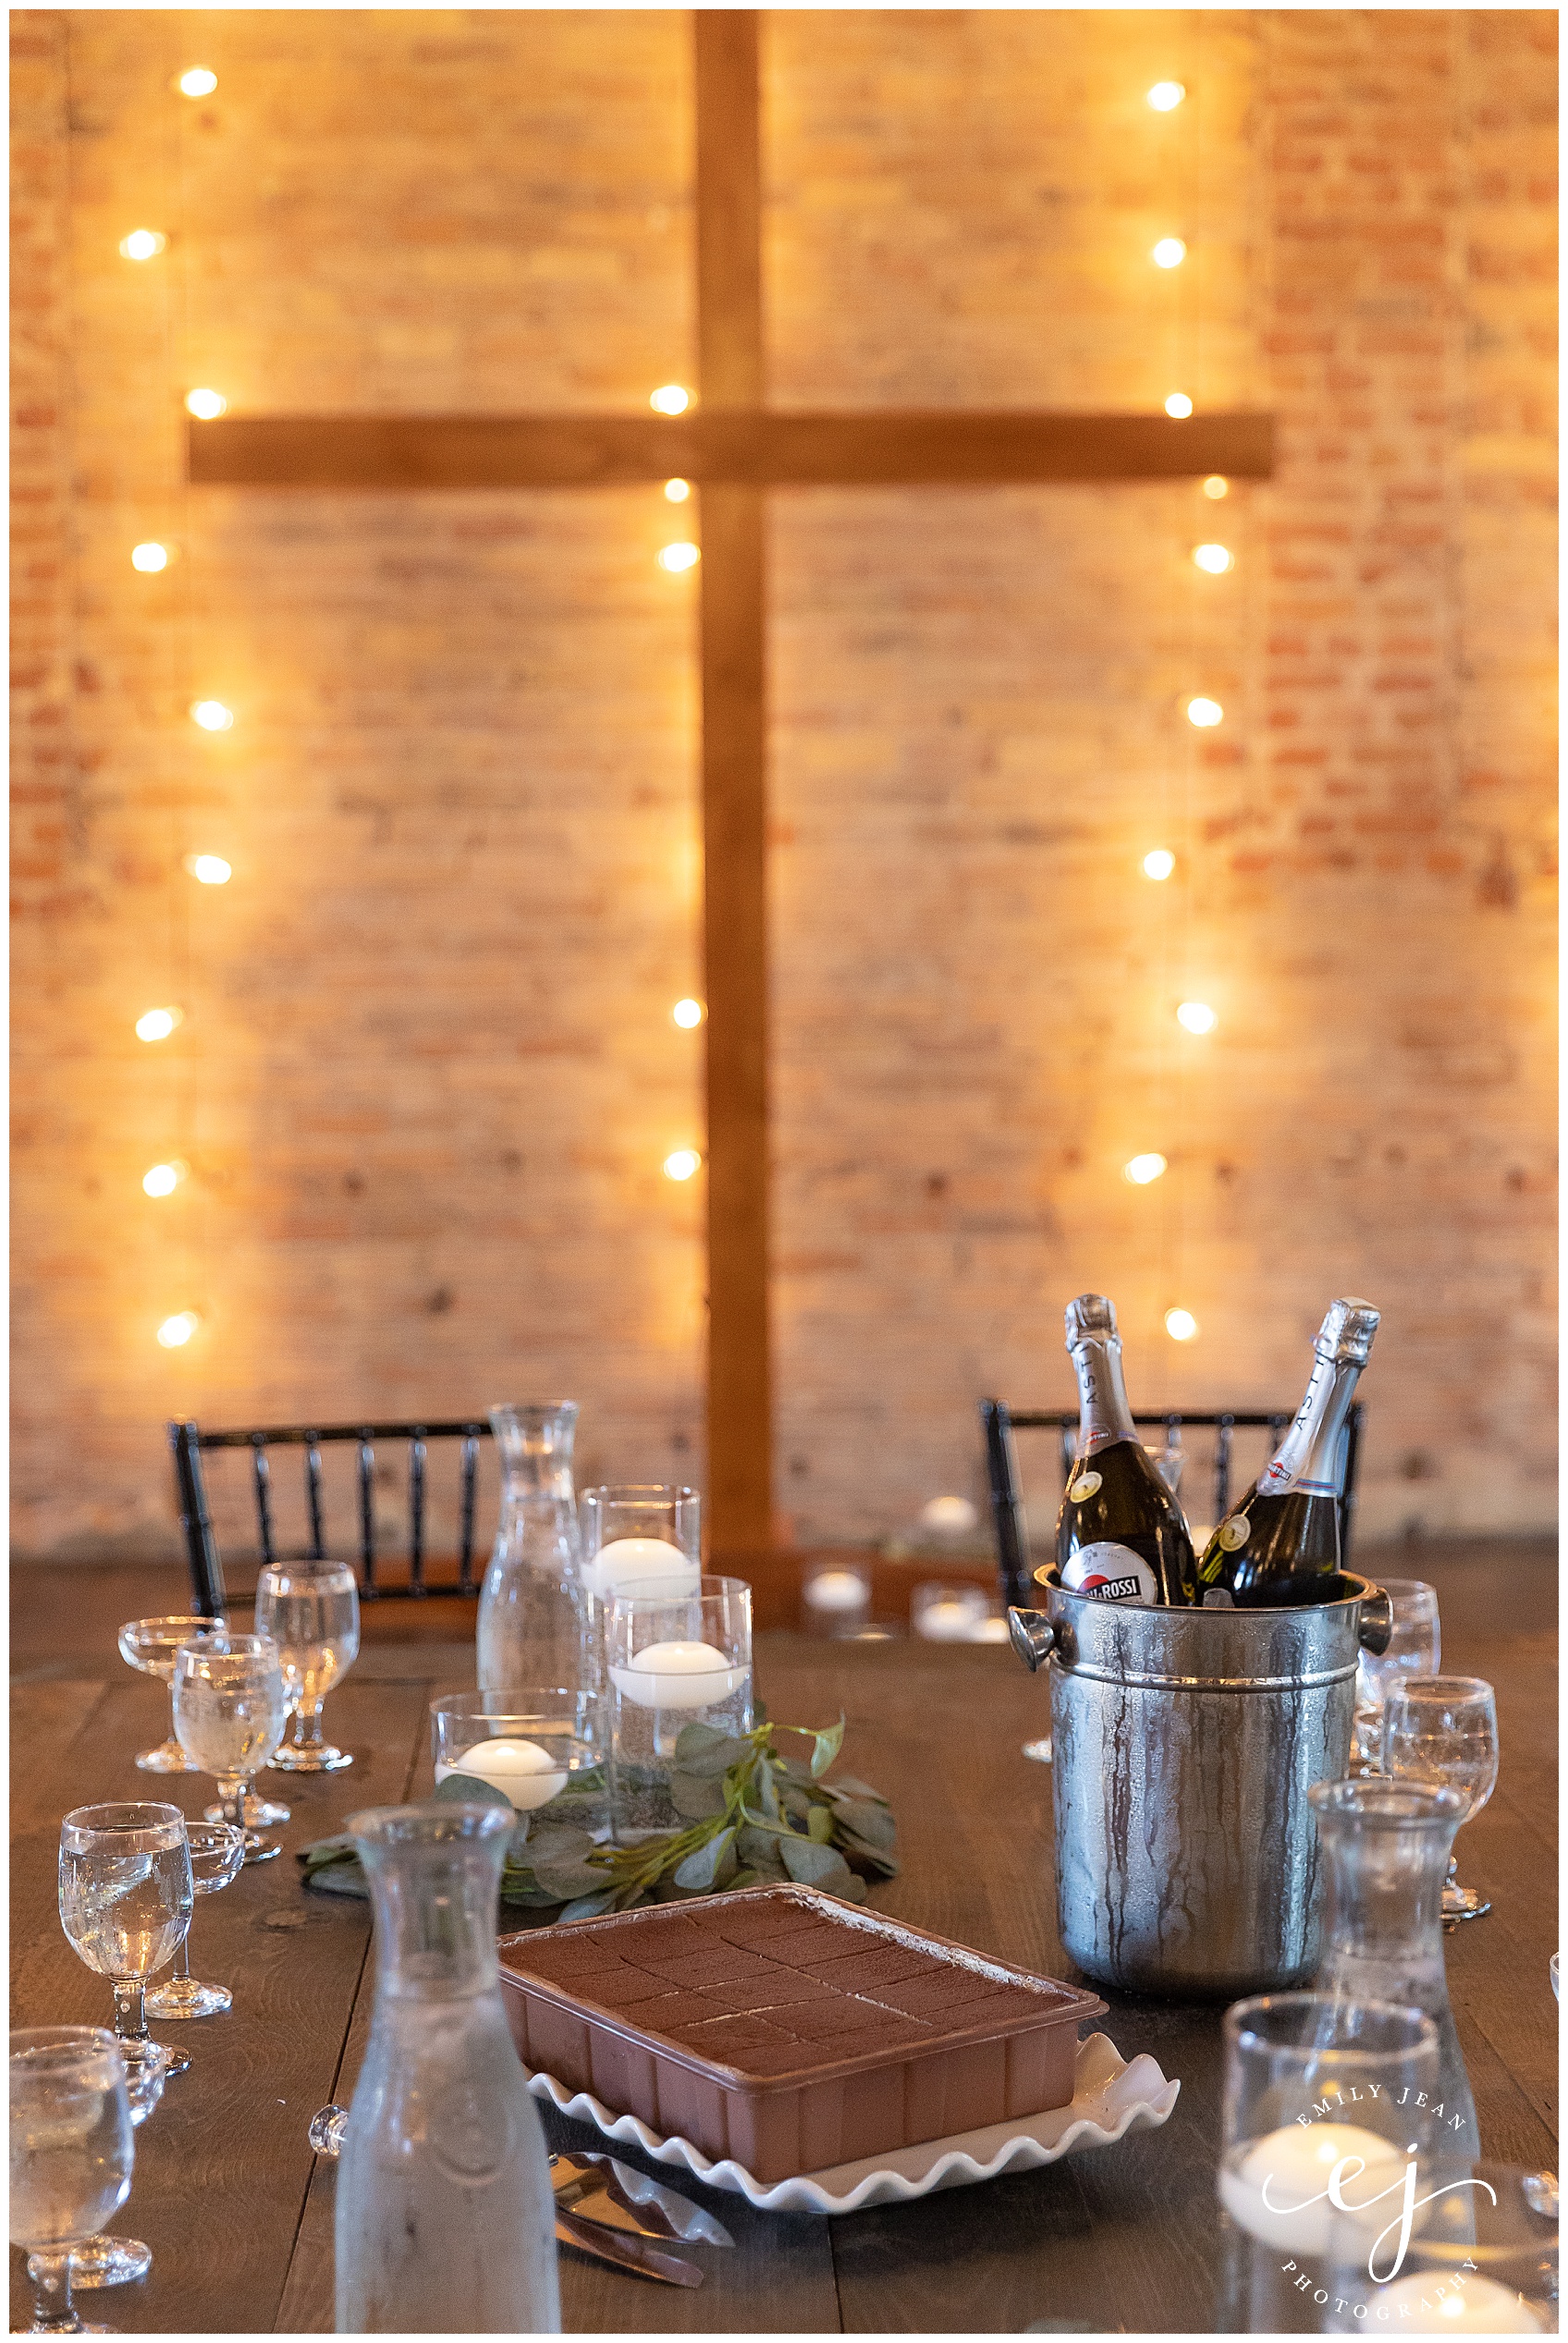 elegant rustic industrial decorations and table centerpieces